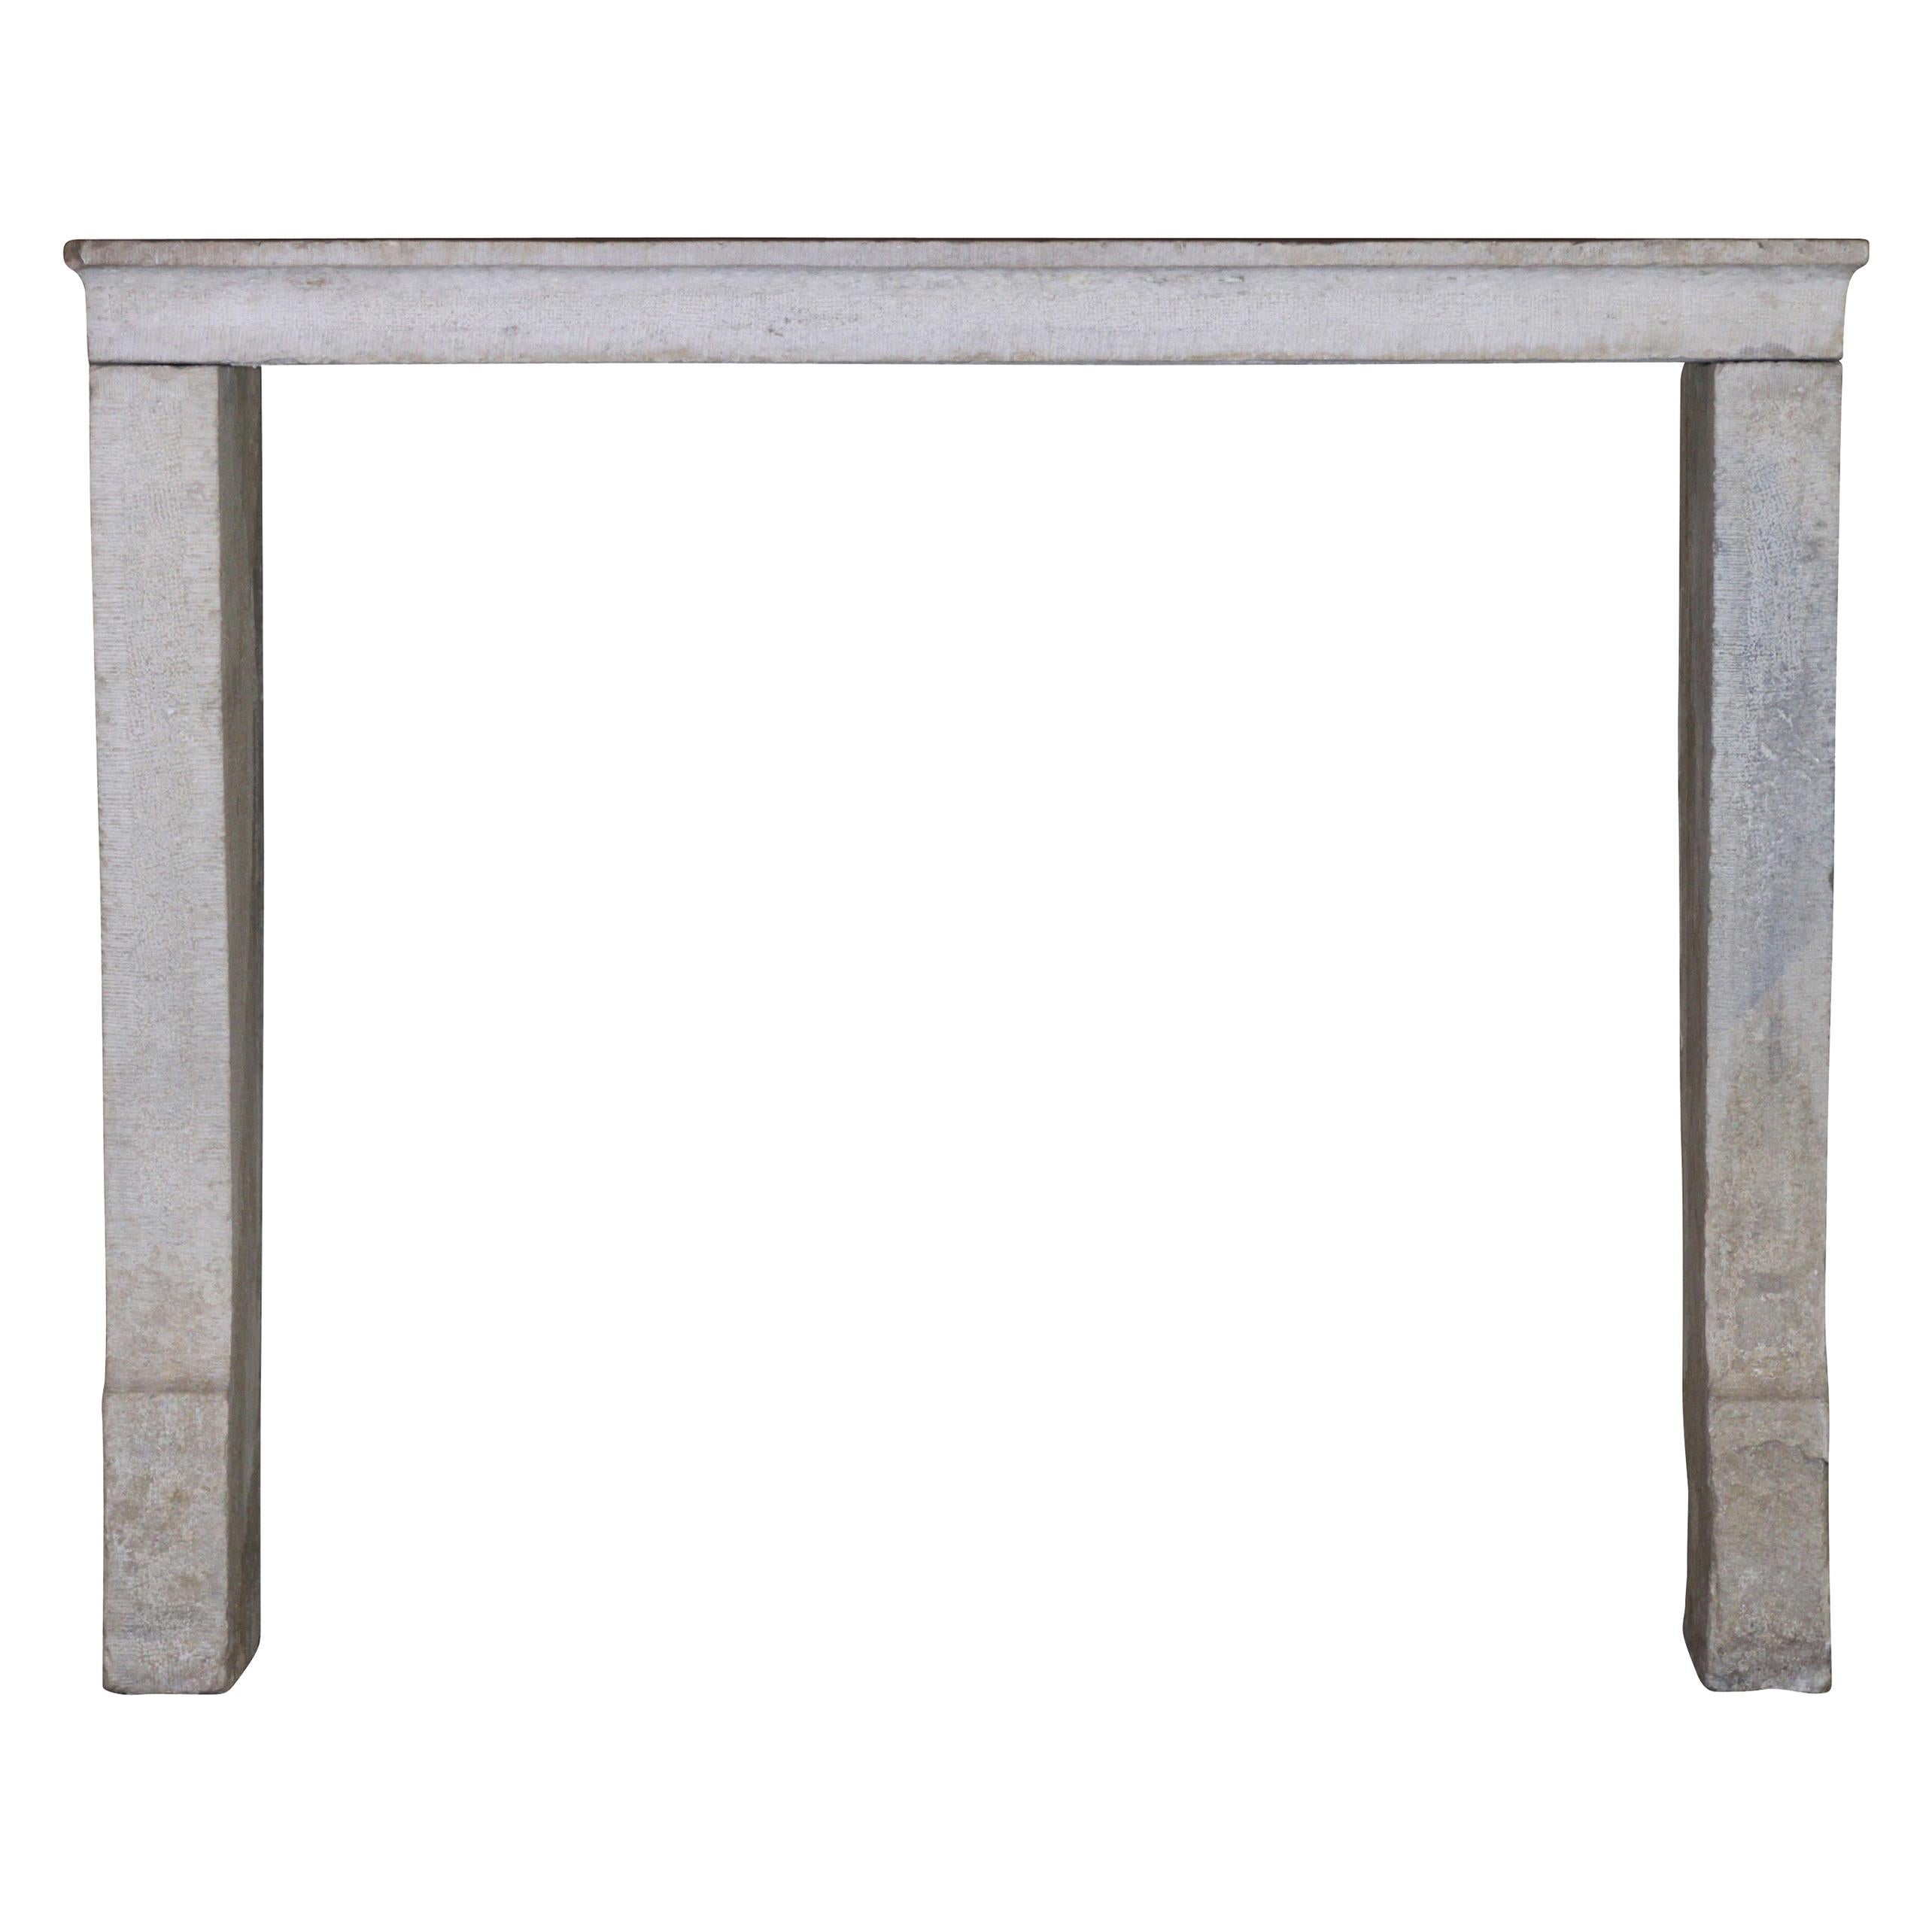 Small French Country Limestone Antique Fireplace Surround